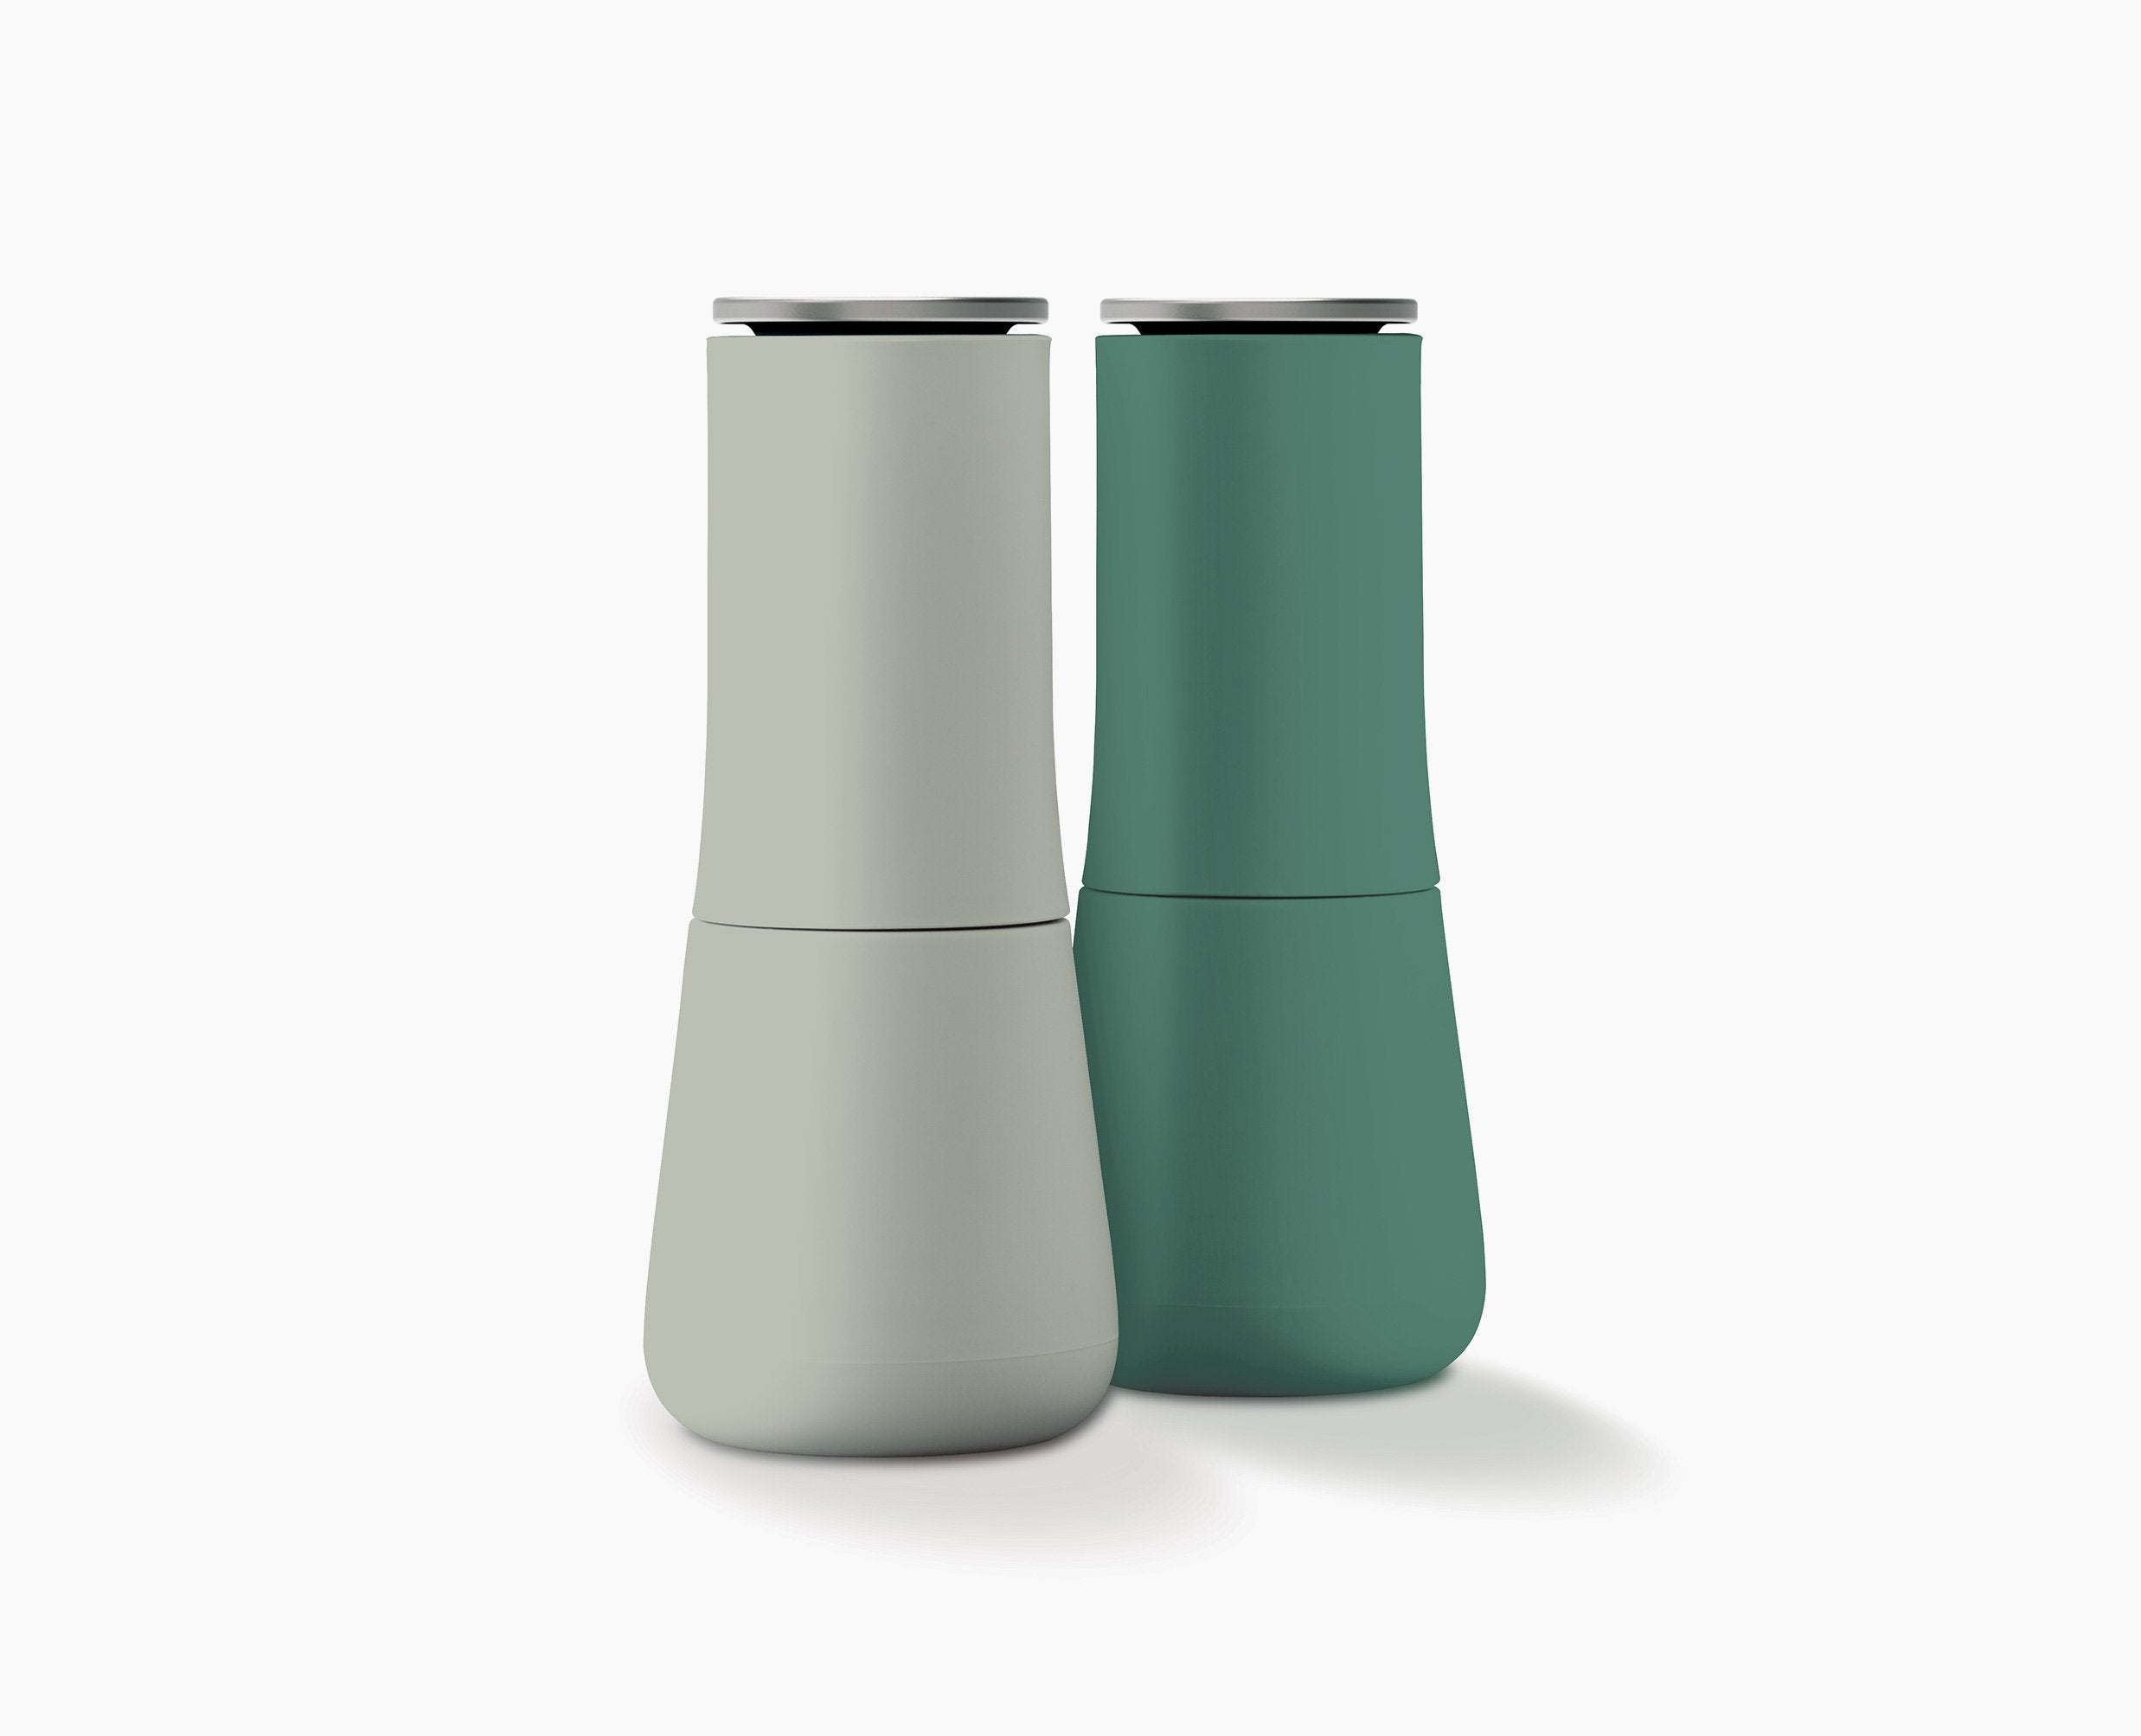 BEON.COM.AU  Create a statement piece on your counter top with our Milltop™ Salt & Pepper Mills now available in the hues of green of our Editions range. The clever design of these elegant salt and pepper mills means the grinding mechanism is at the top so any excess grounds fall back inside the unit rat... Joseph Joseph at BEON.COM.AU